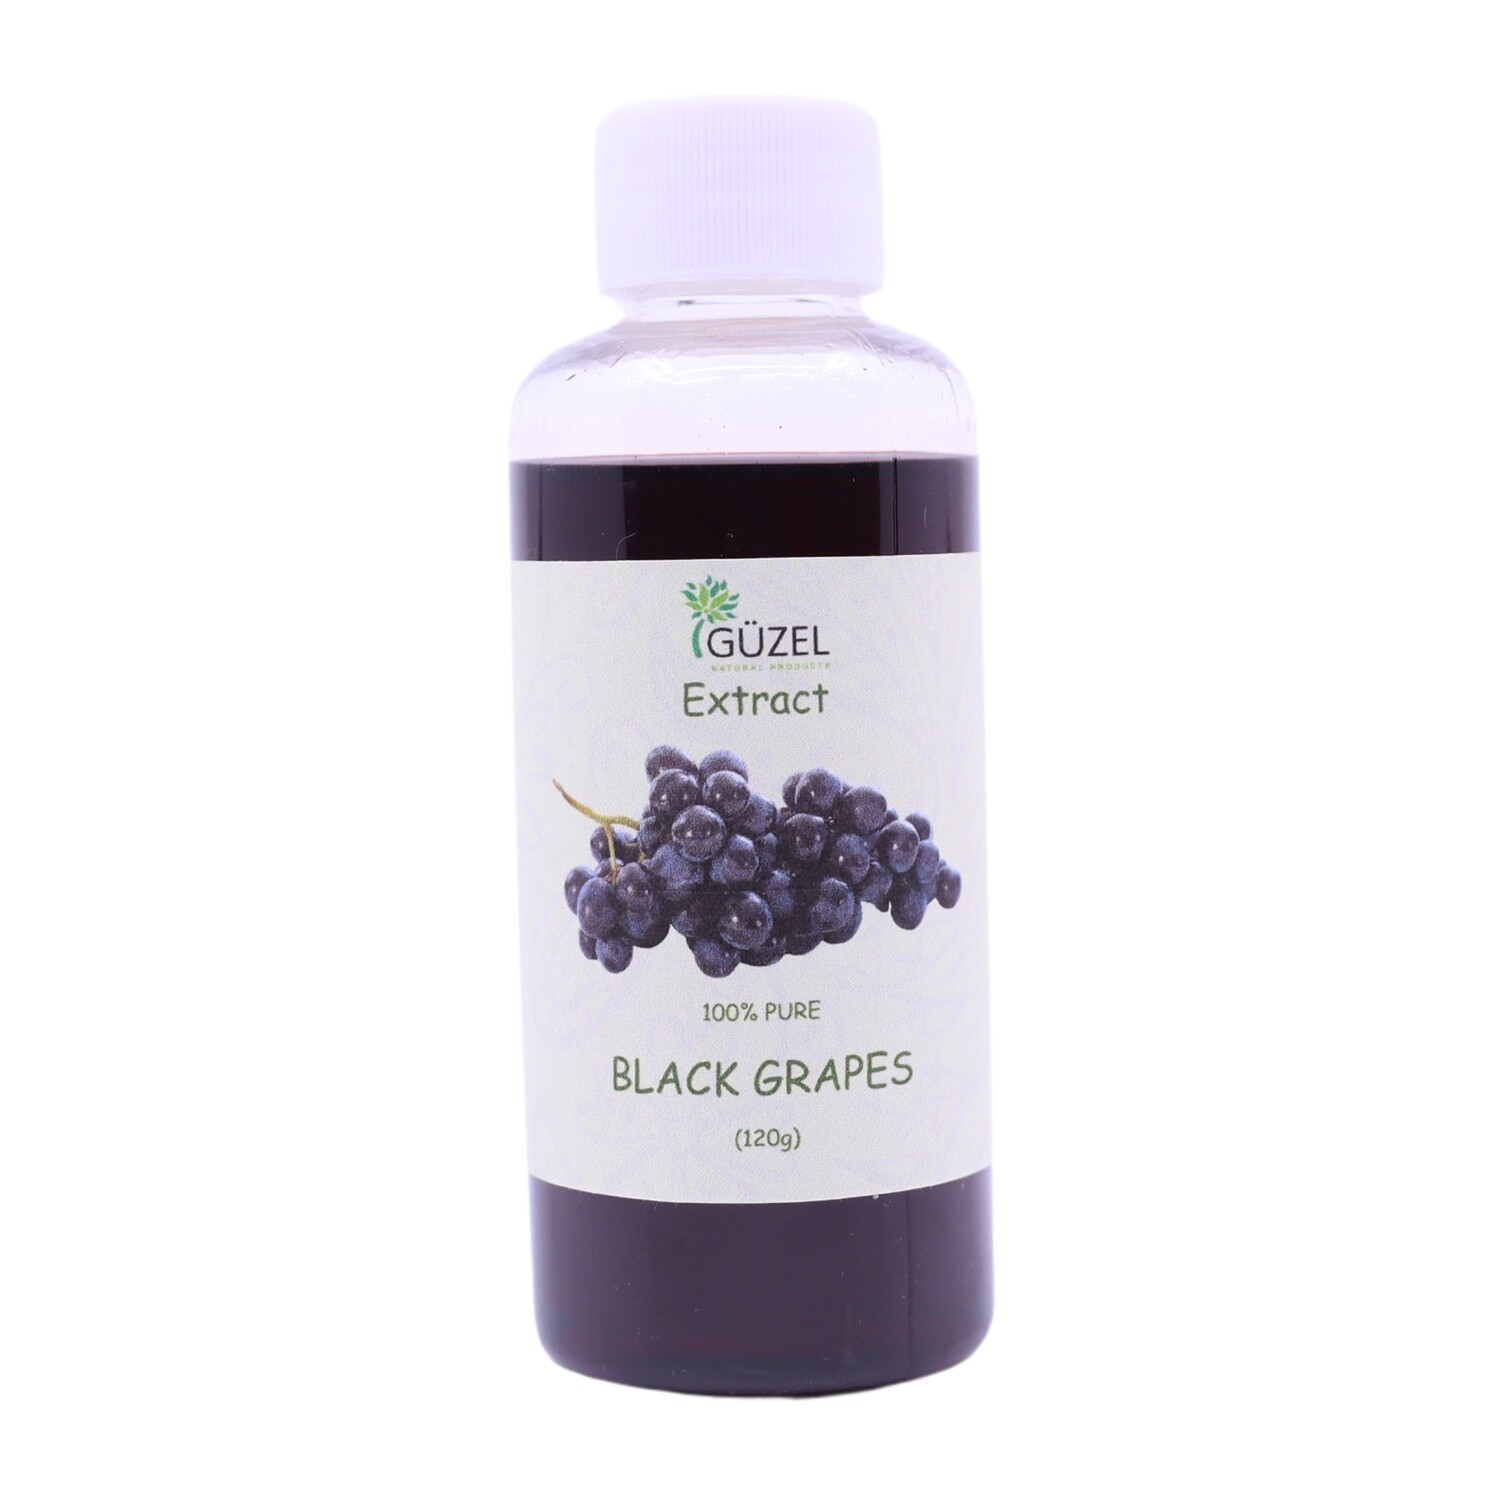 Black grapes Extract